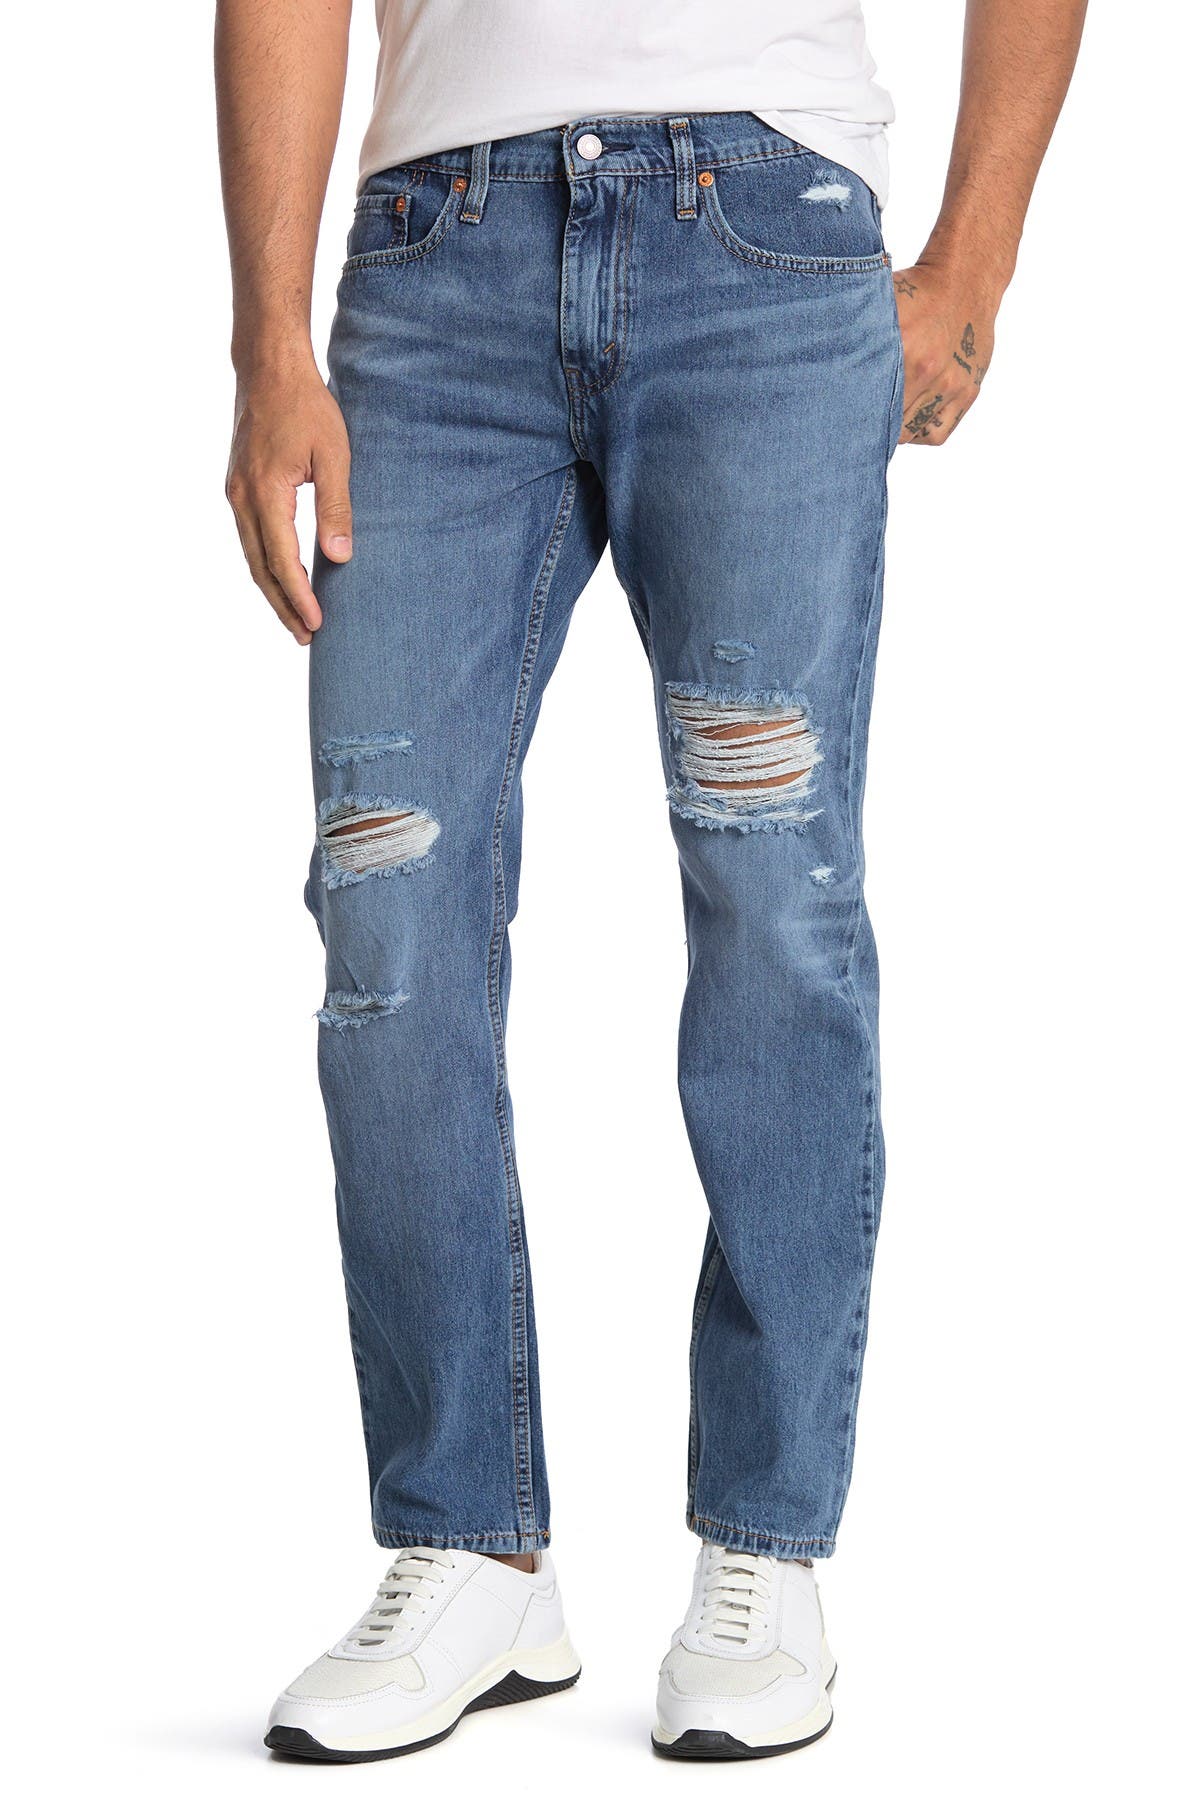 levi's 502 ripped jeans